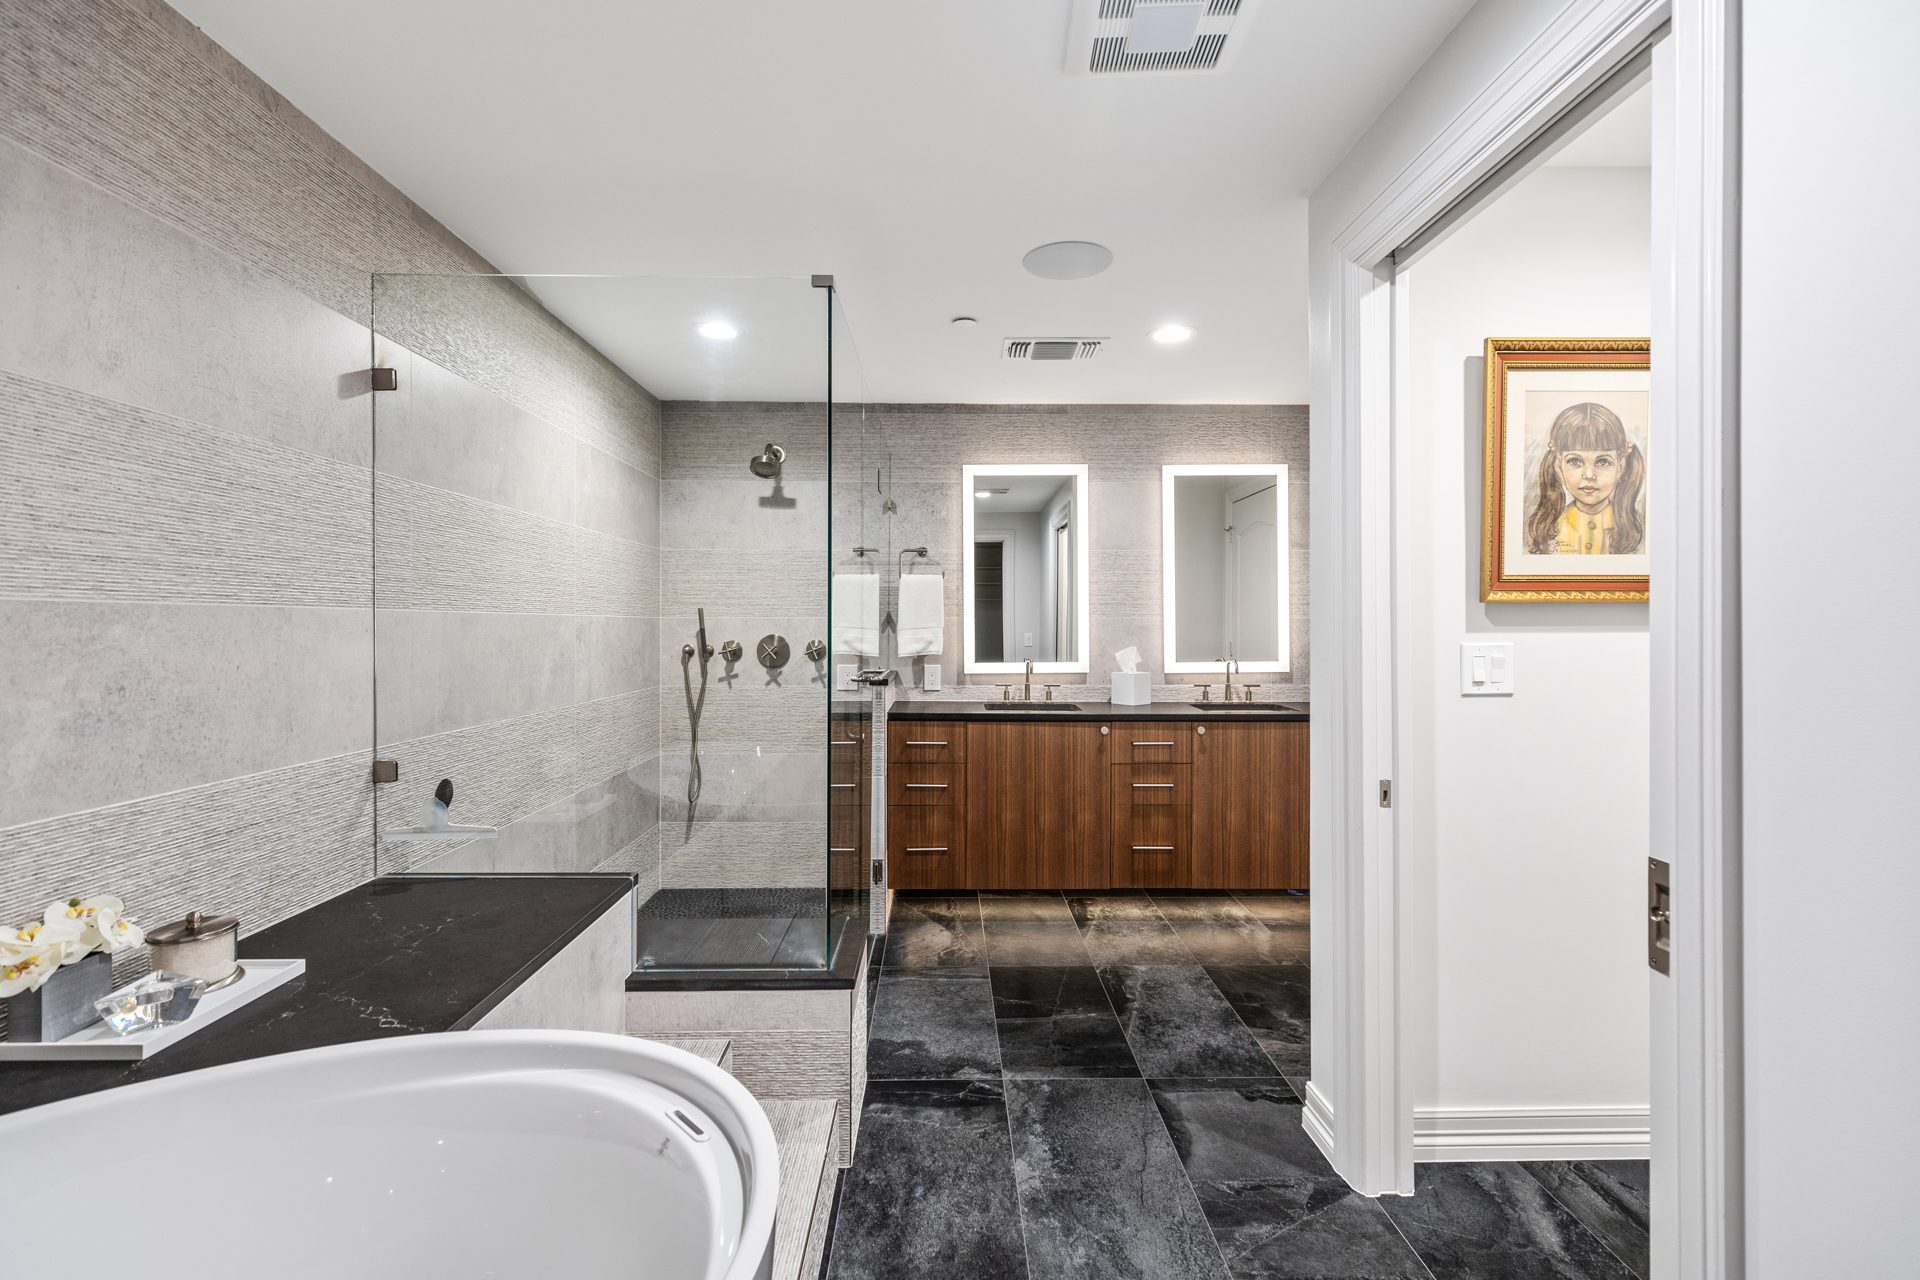 From the Japanese soaking tub, one can enjoy a stunning view of the newly installed custom vanity in the remodeled master bathroom at Mayfair by the Renowned Group of Dallas